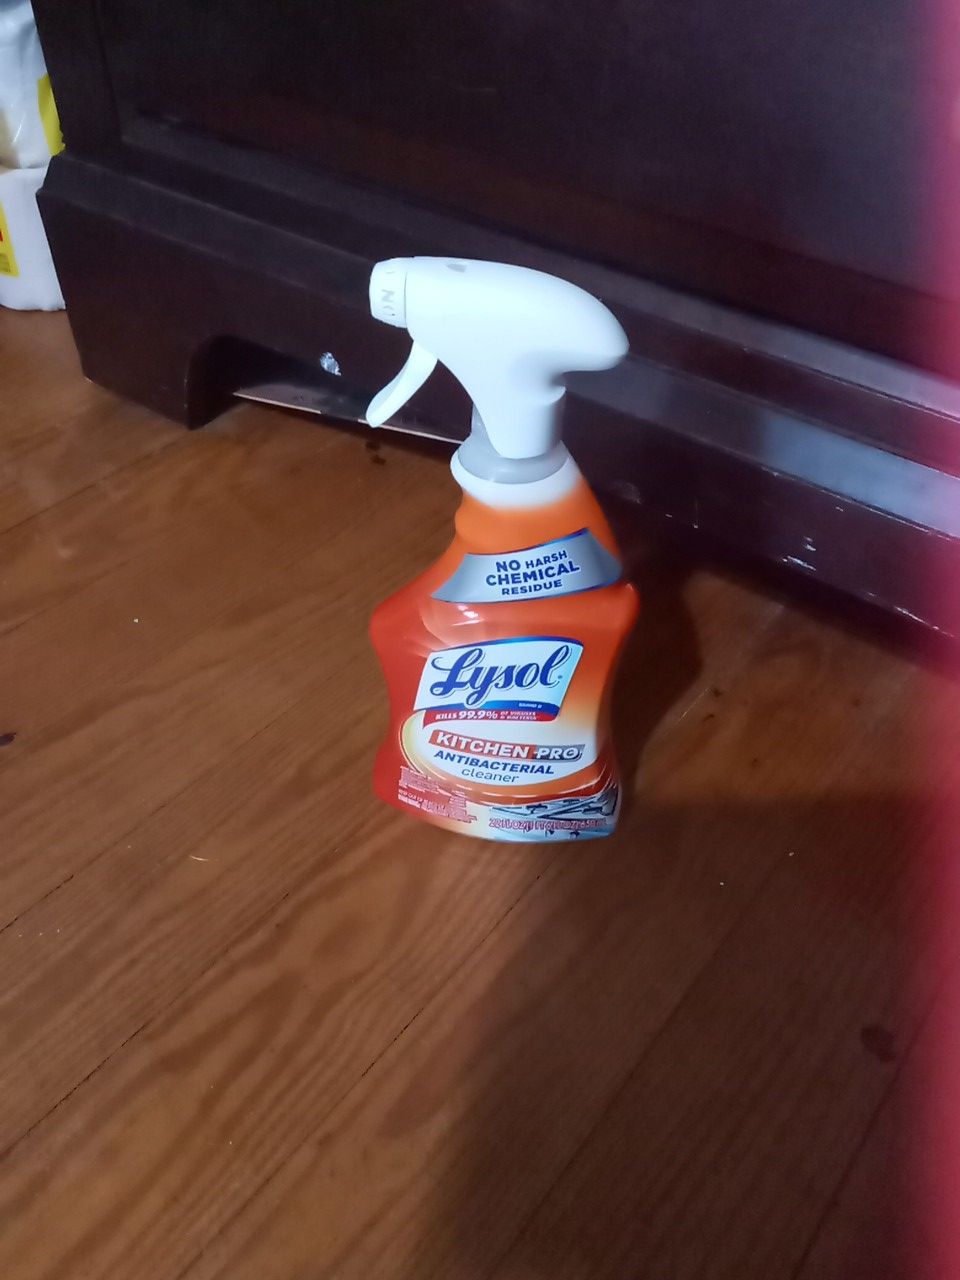 Brand new bottle of lysol kitchen antibacterial cleaner